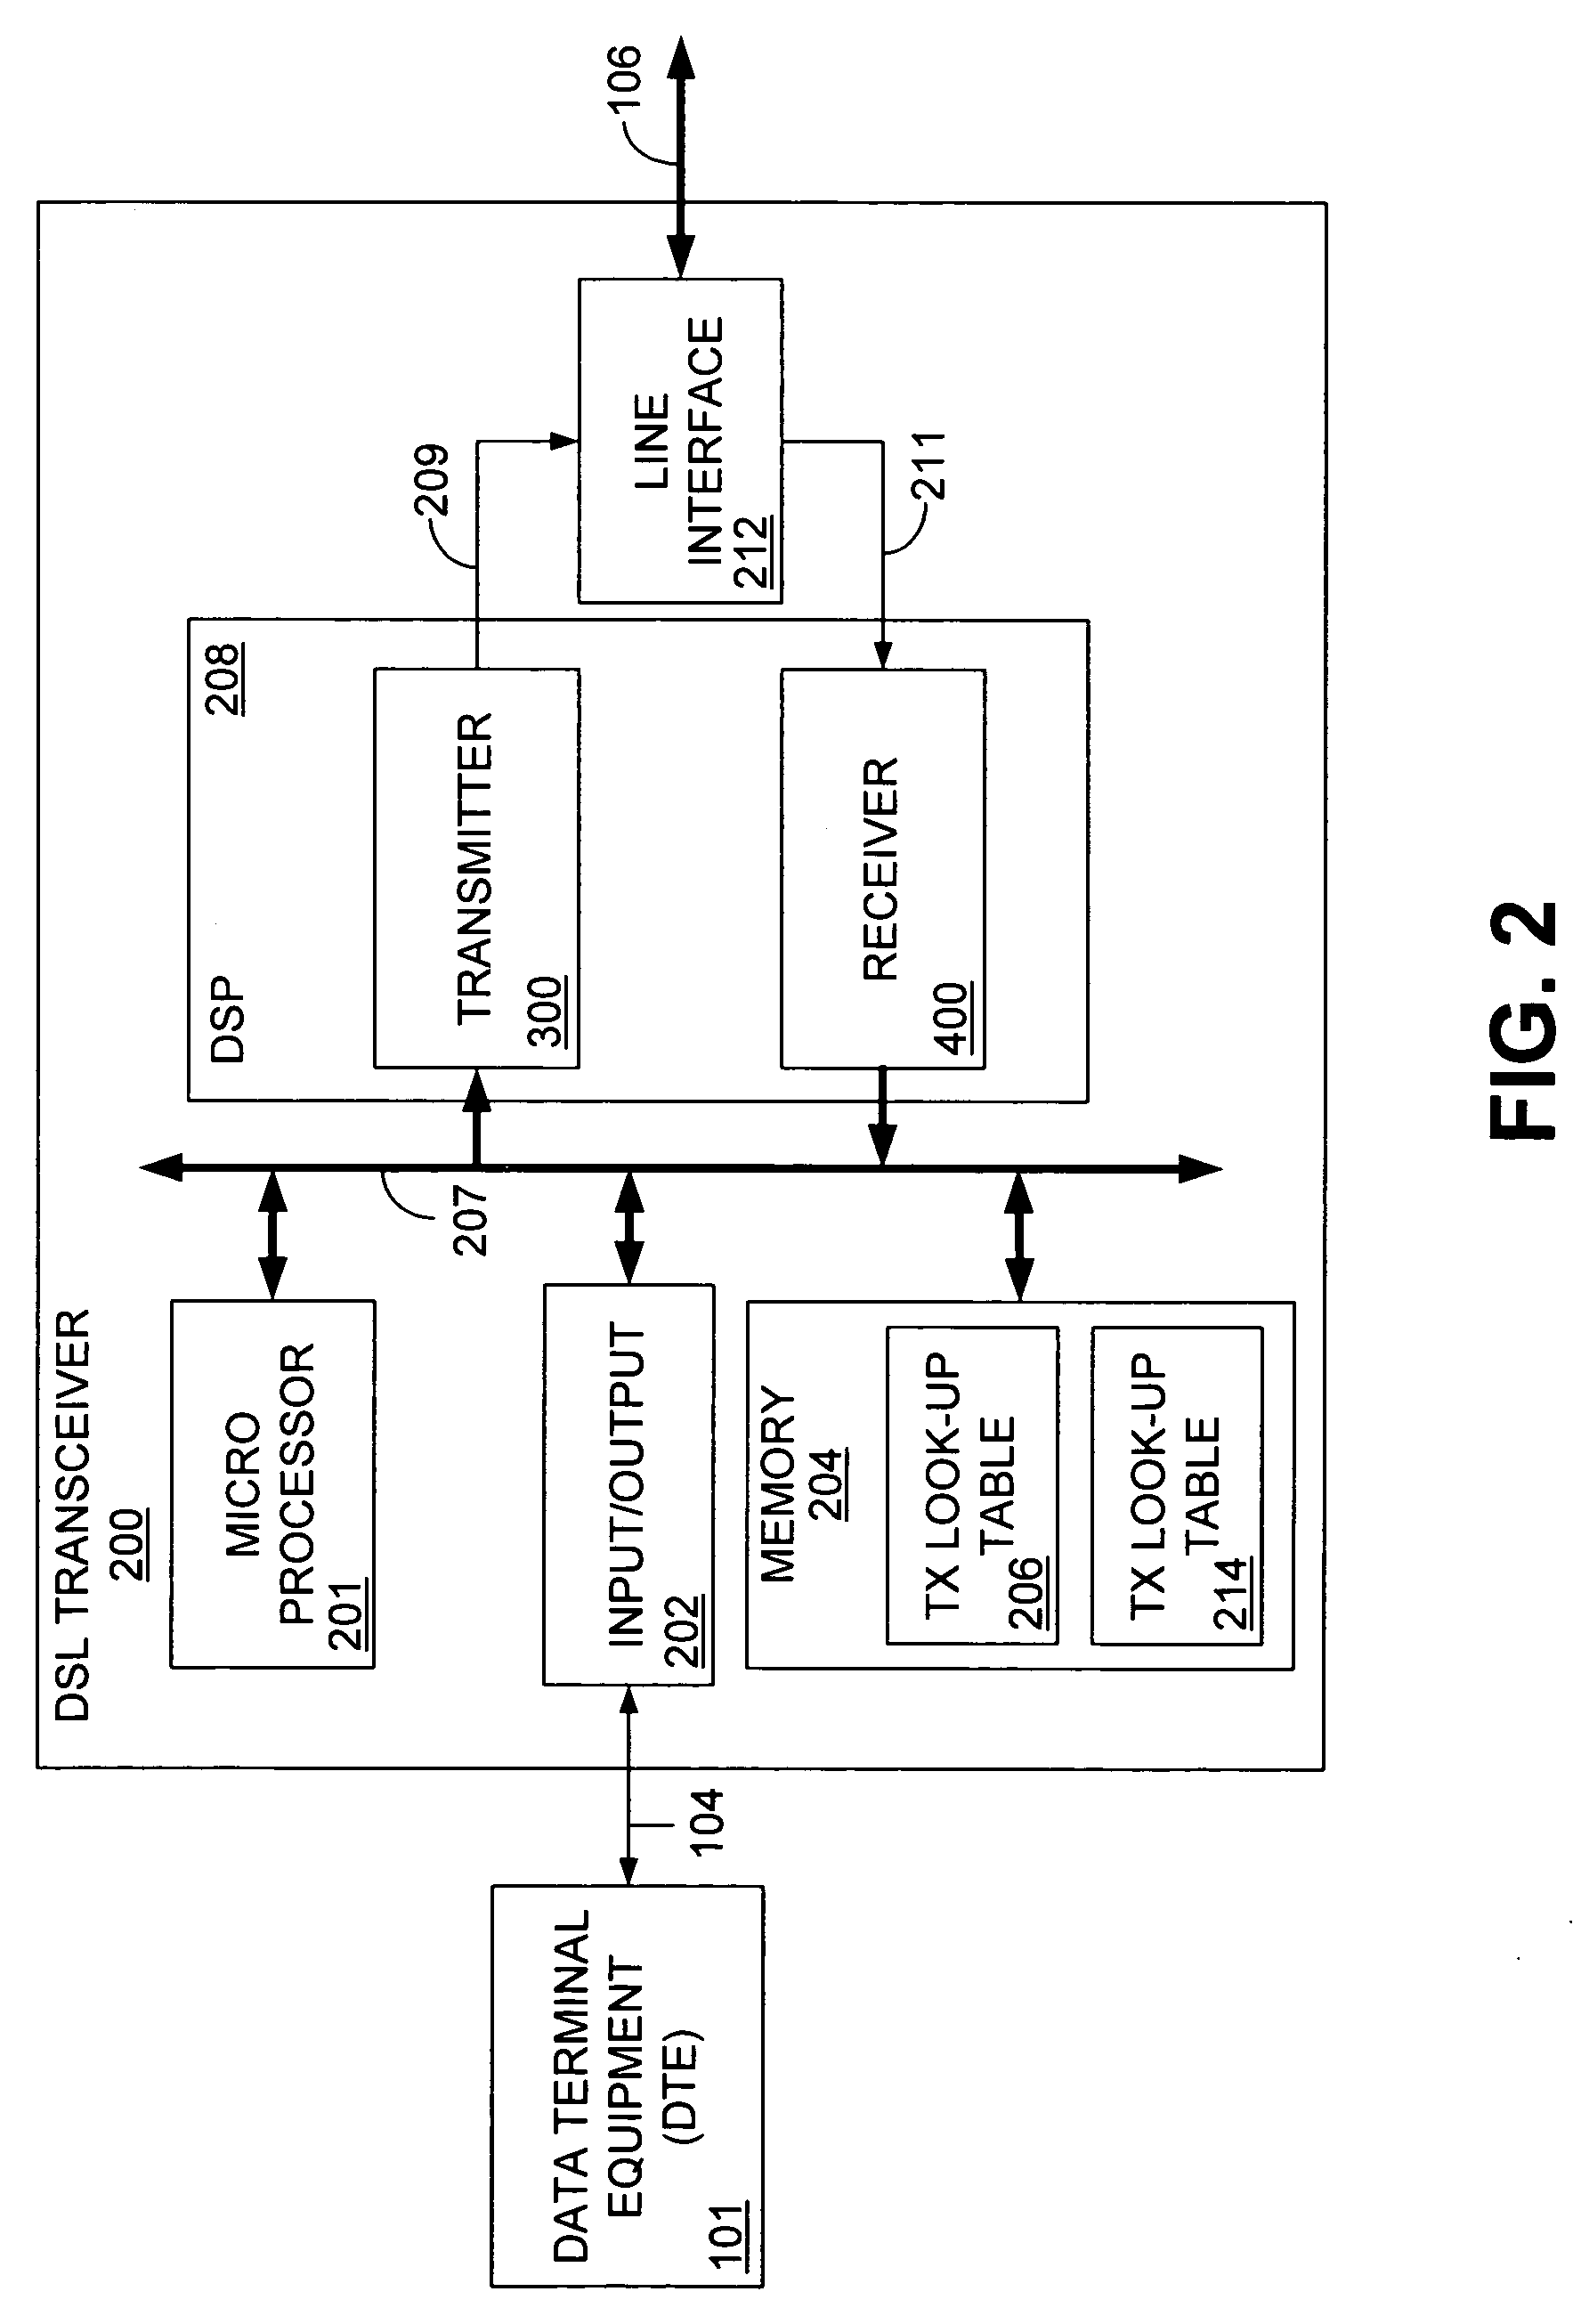 Fractional bit rate encoding in a discrete multi-tone communication system